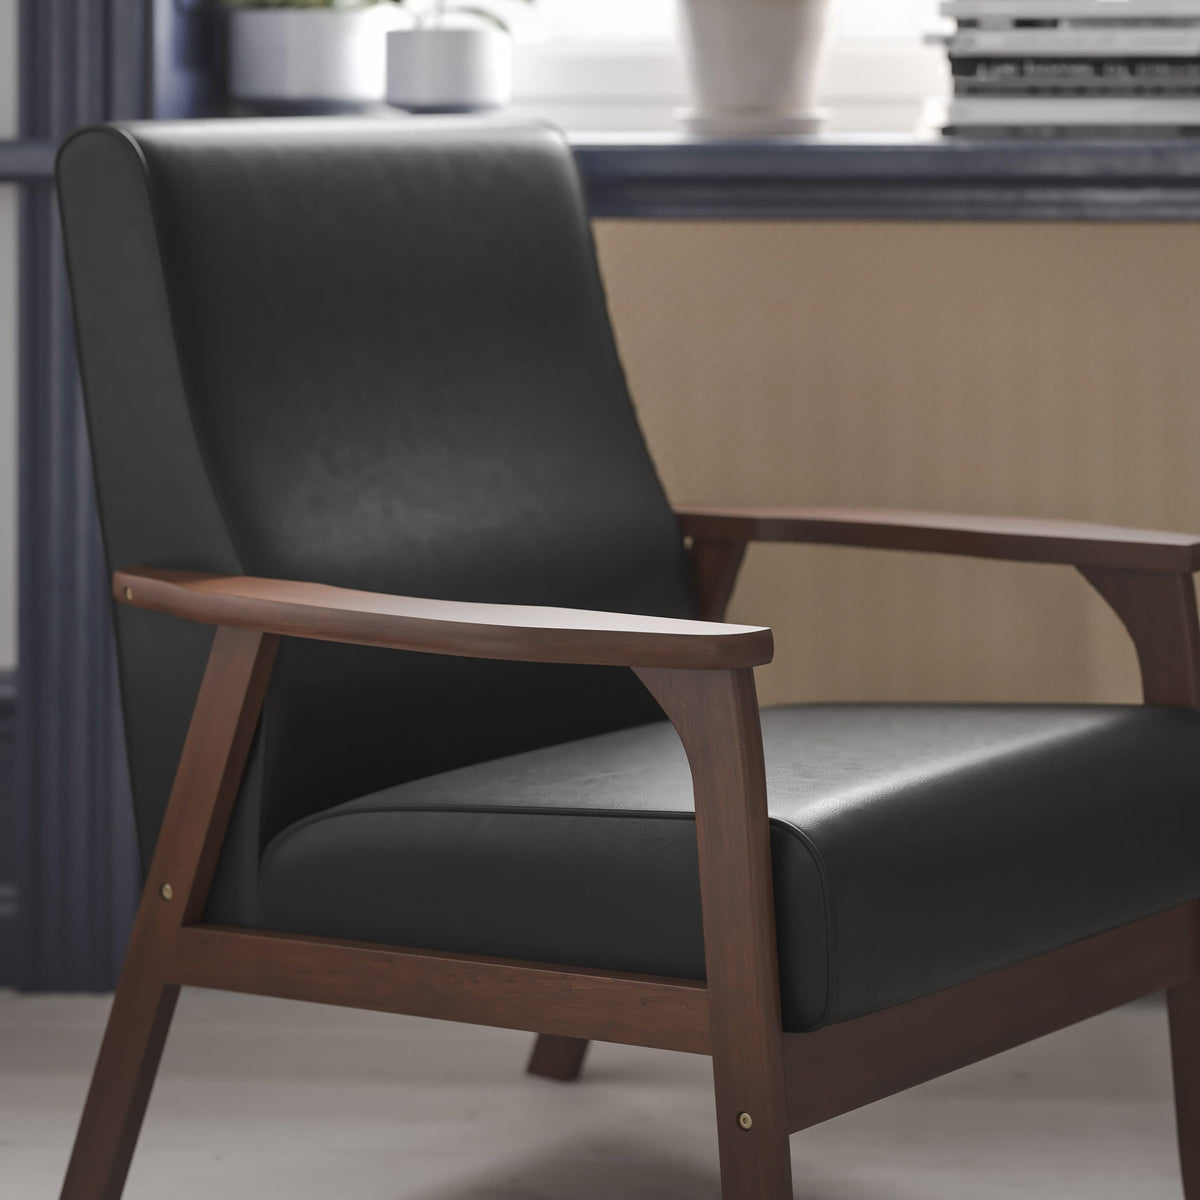 Black LeatherSoft |#| Mid-Century Modern Black LeatherSoft Arm Chair with Wooden Frame and Arms